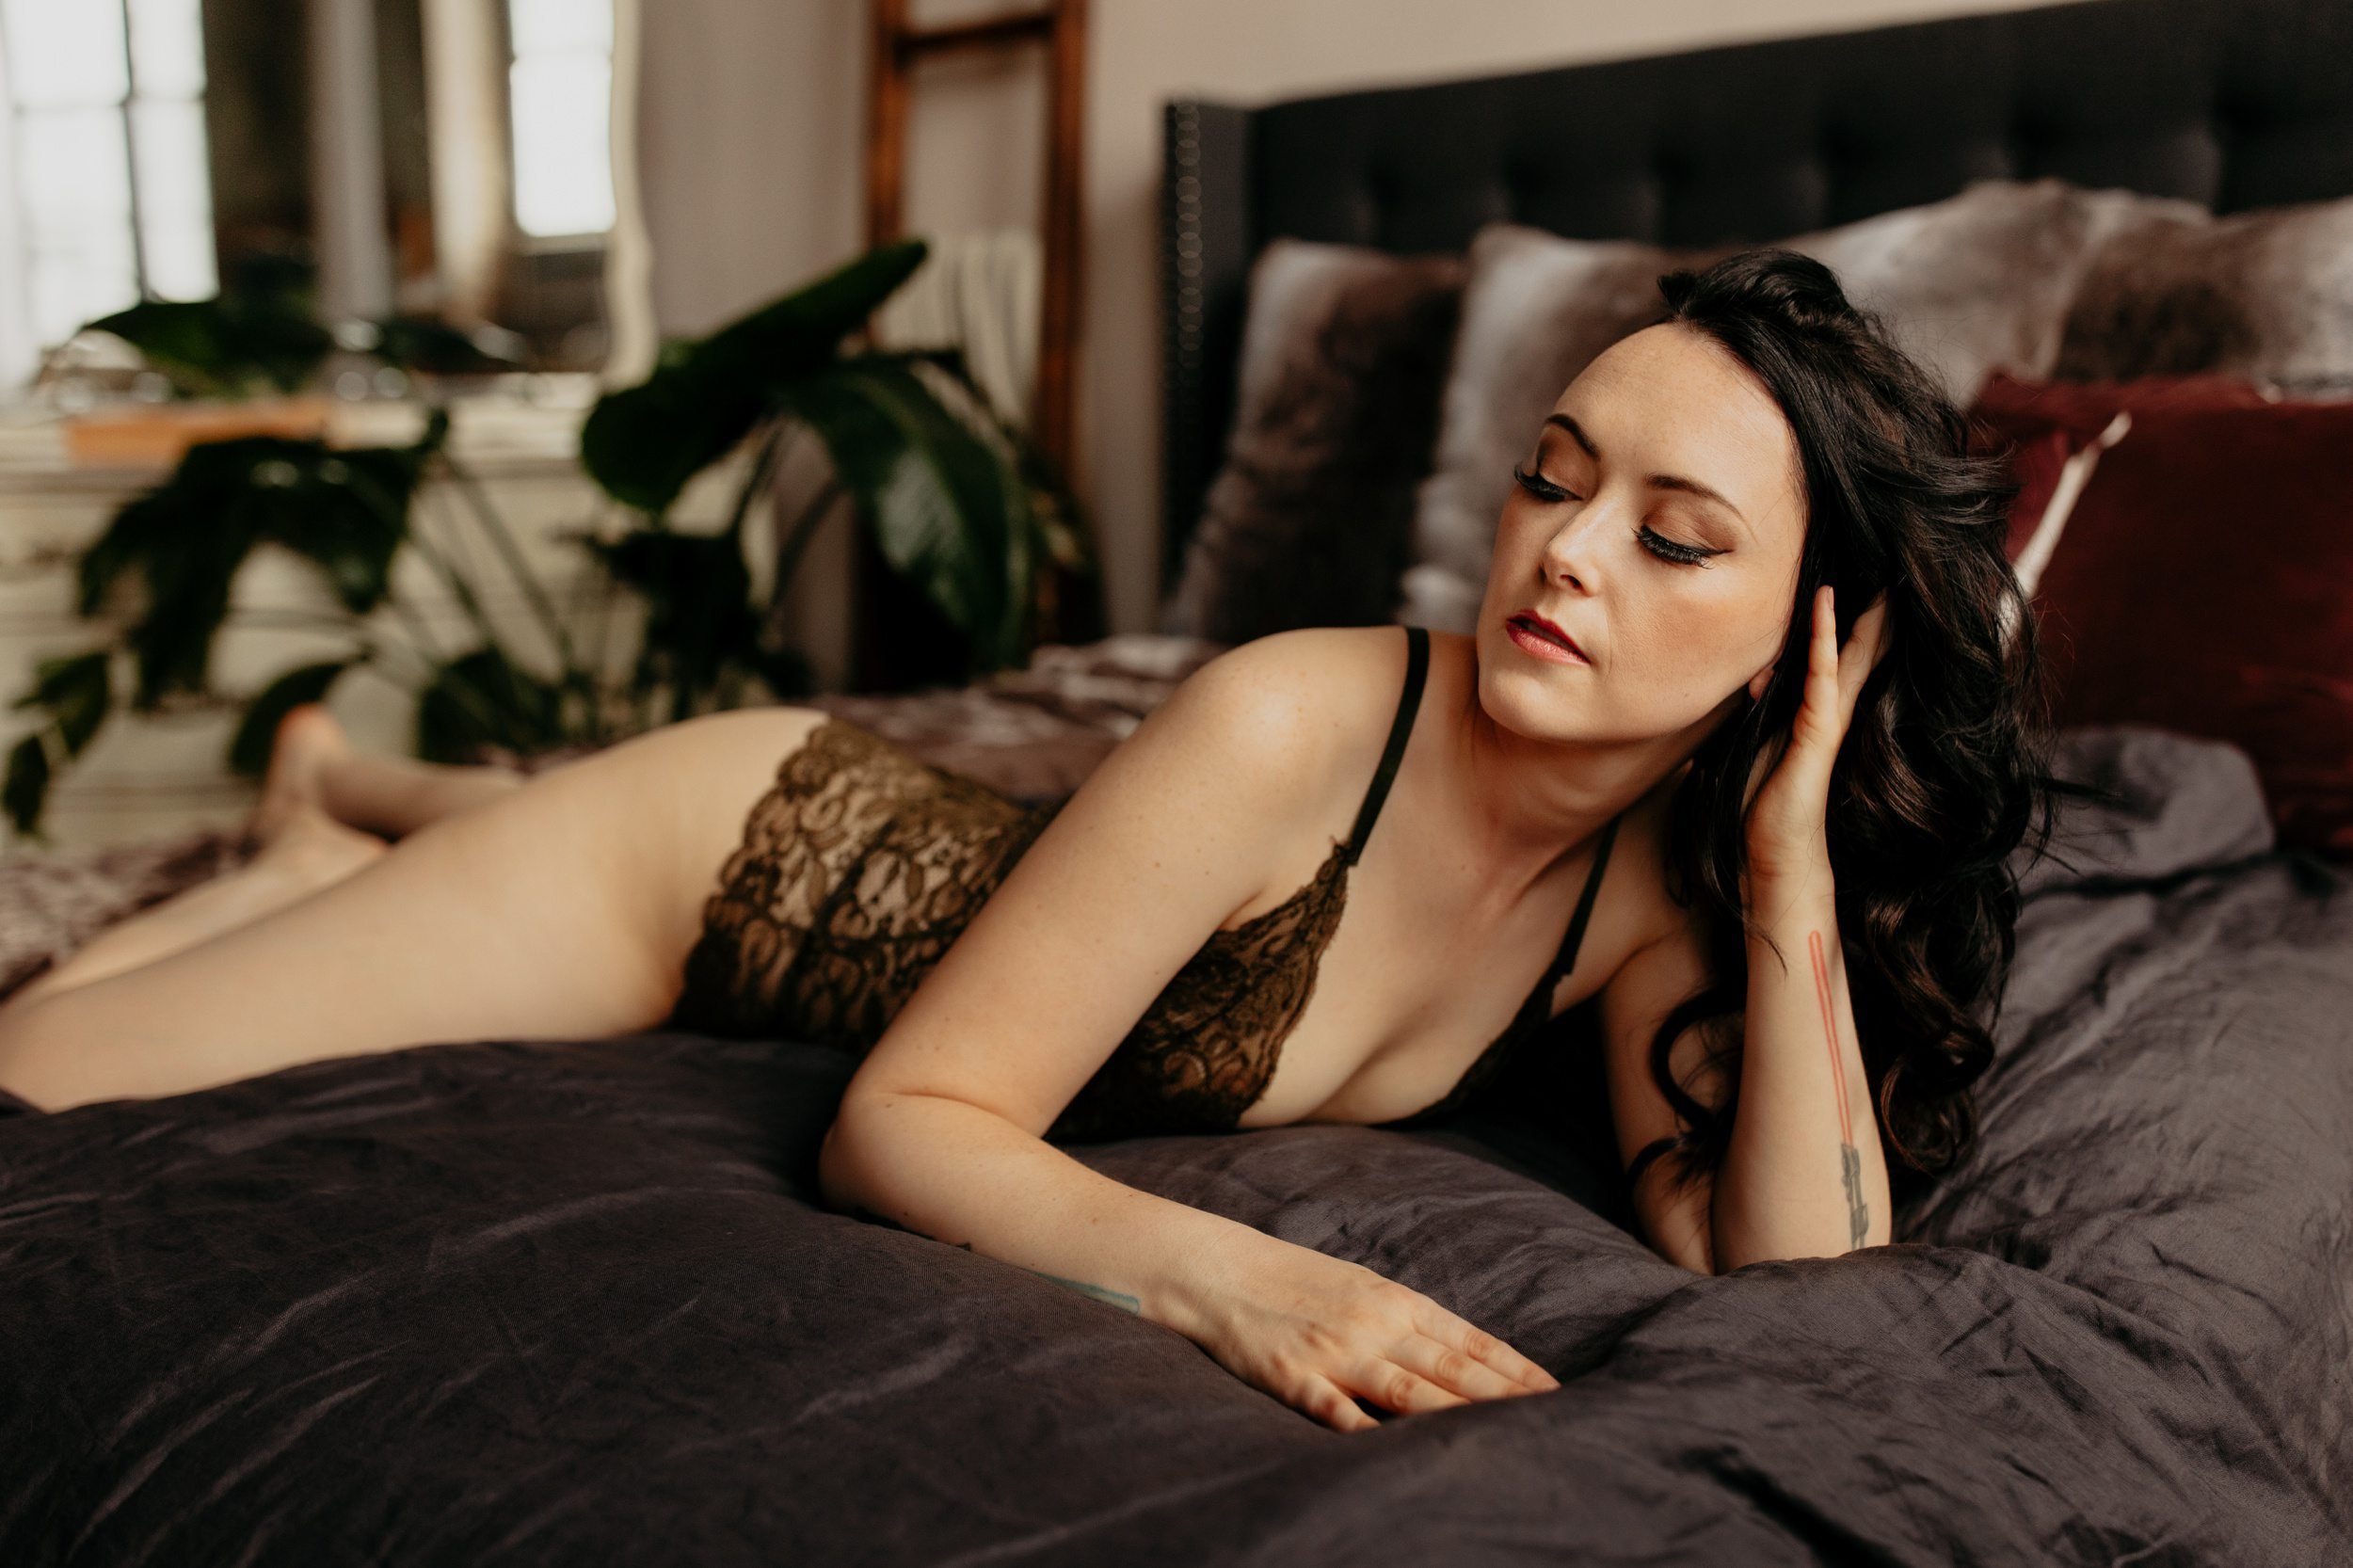 Boudoir-Style-Portraits-with-Dungeons-and-Dragons-Roleplaying-Props-0003.JPG